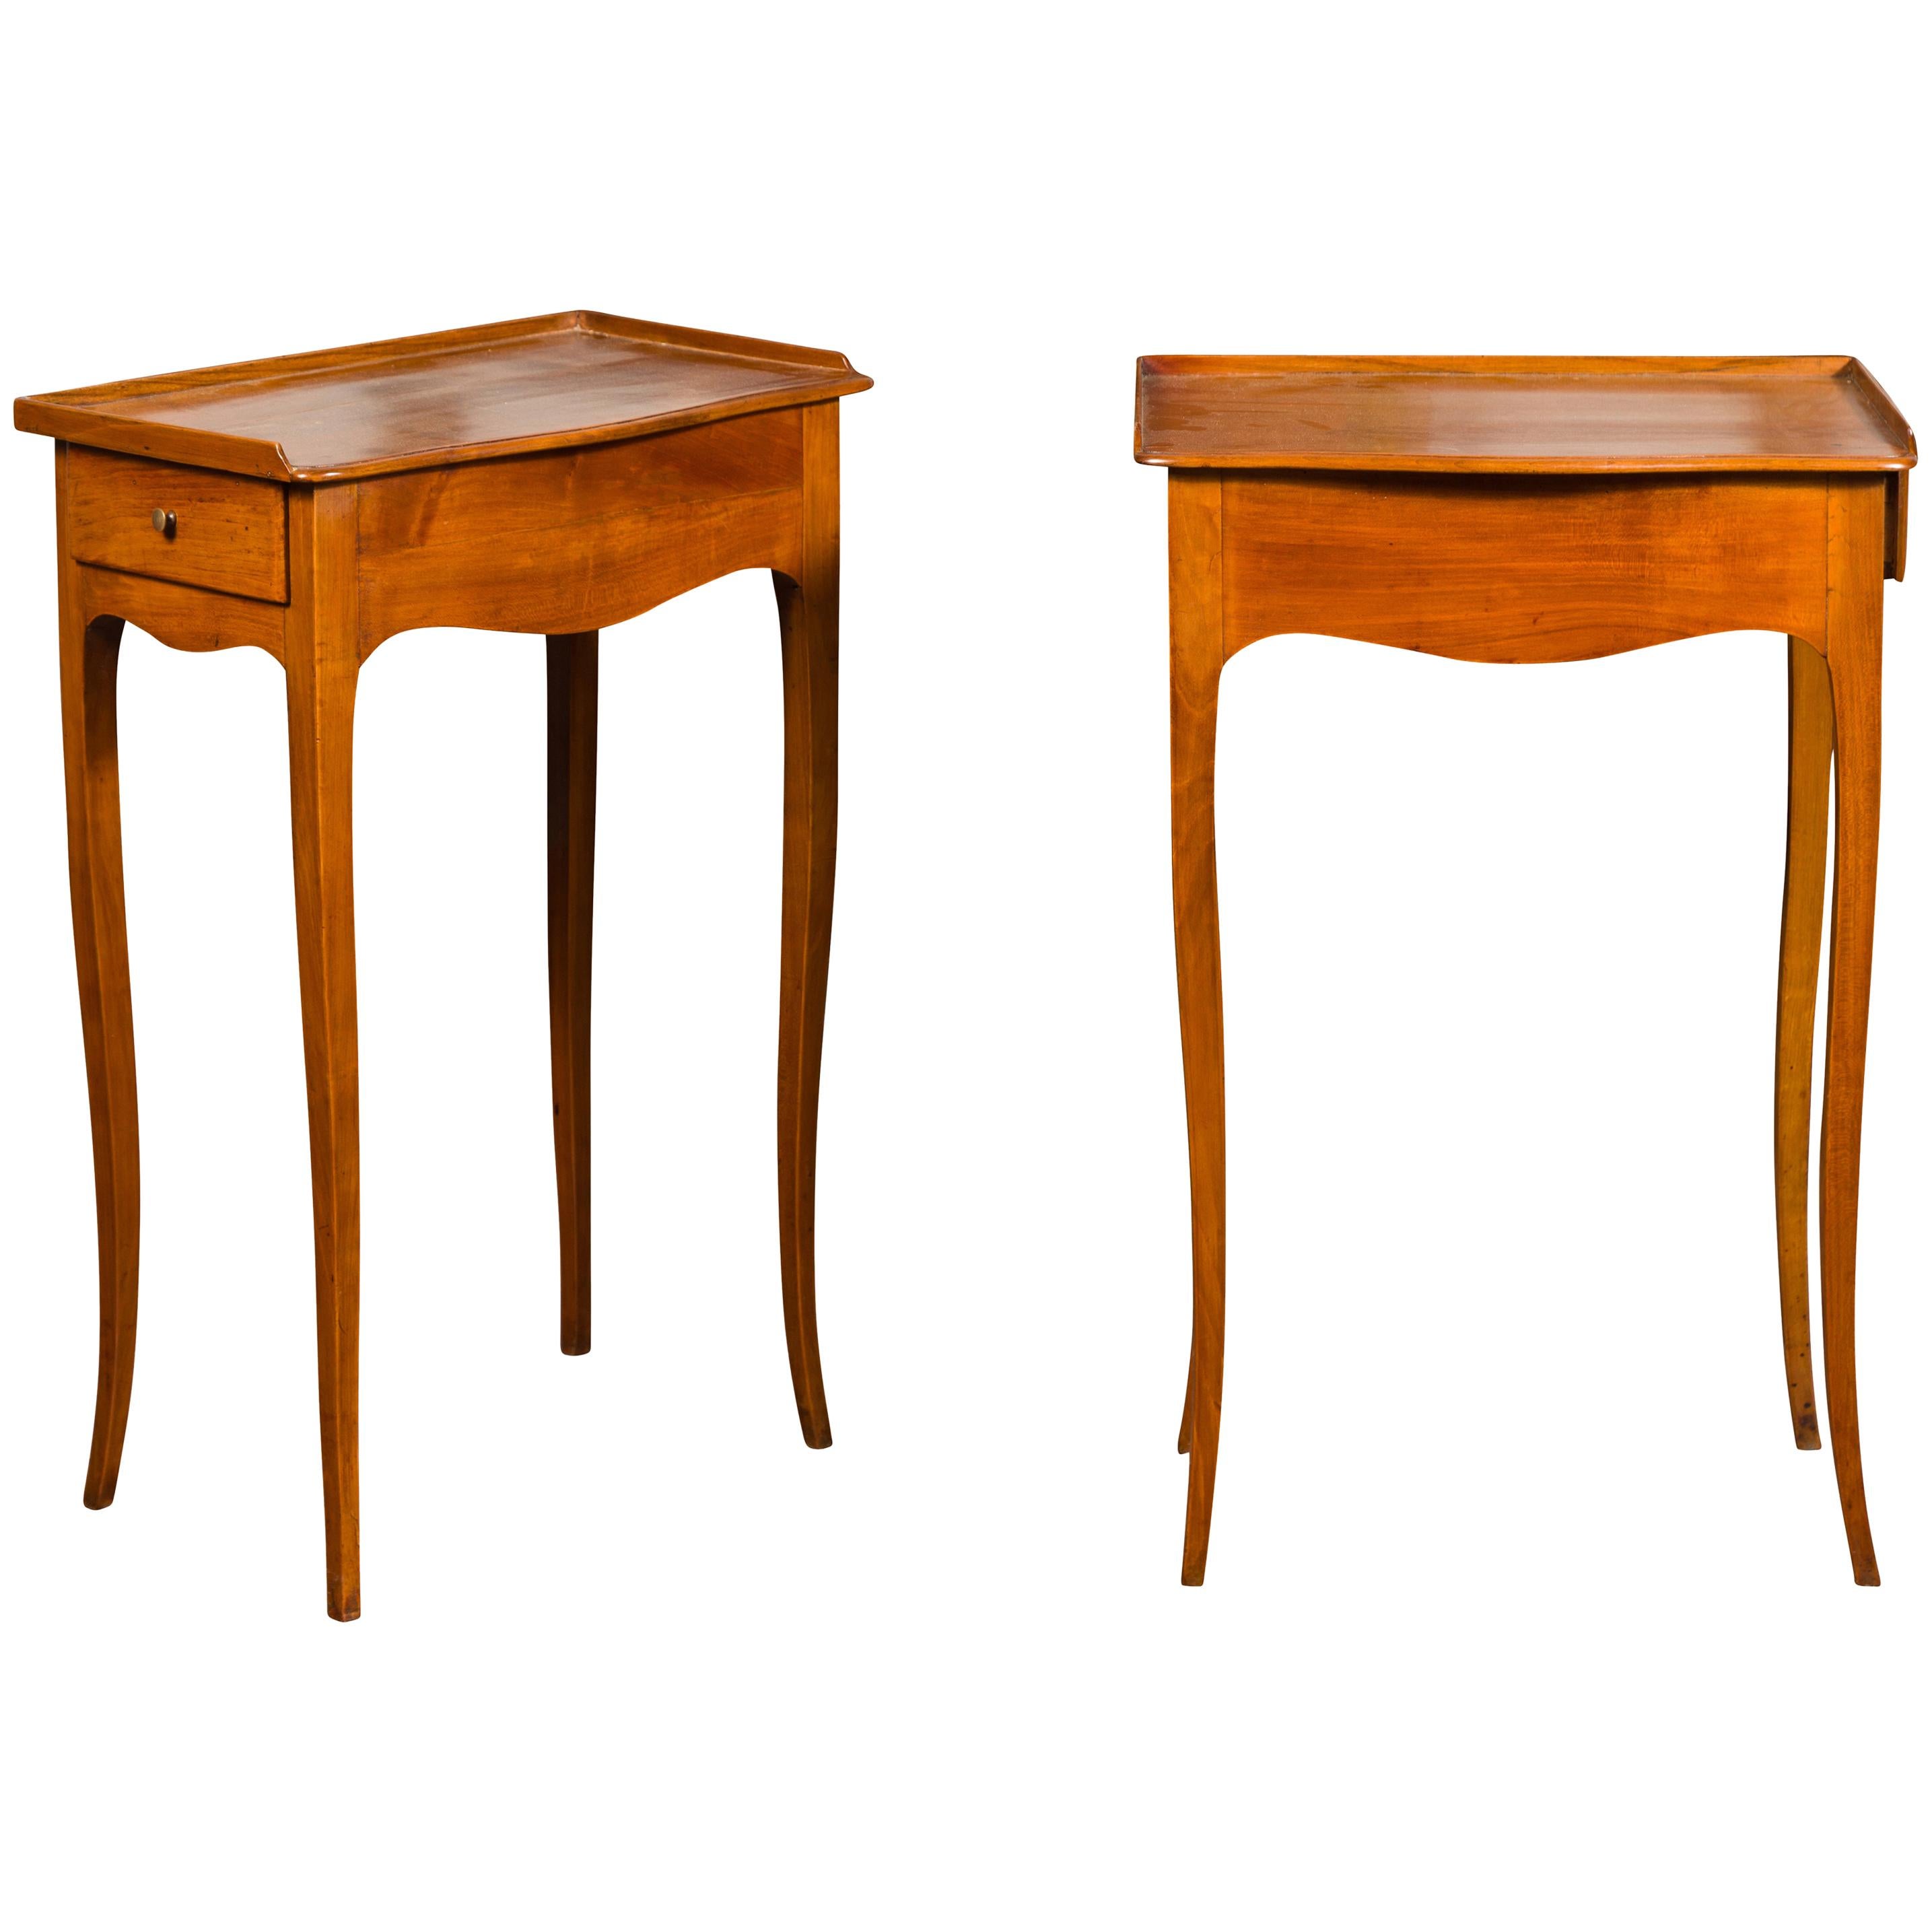 Pair of French 1860s Napoleon III Period Walnut Side Tables with Lateral Drawers